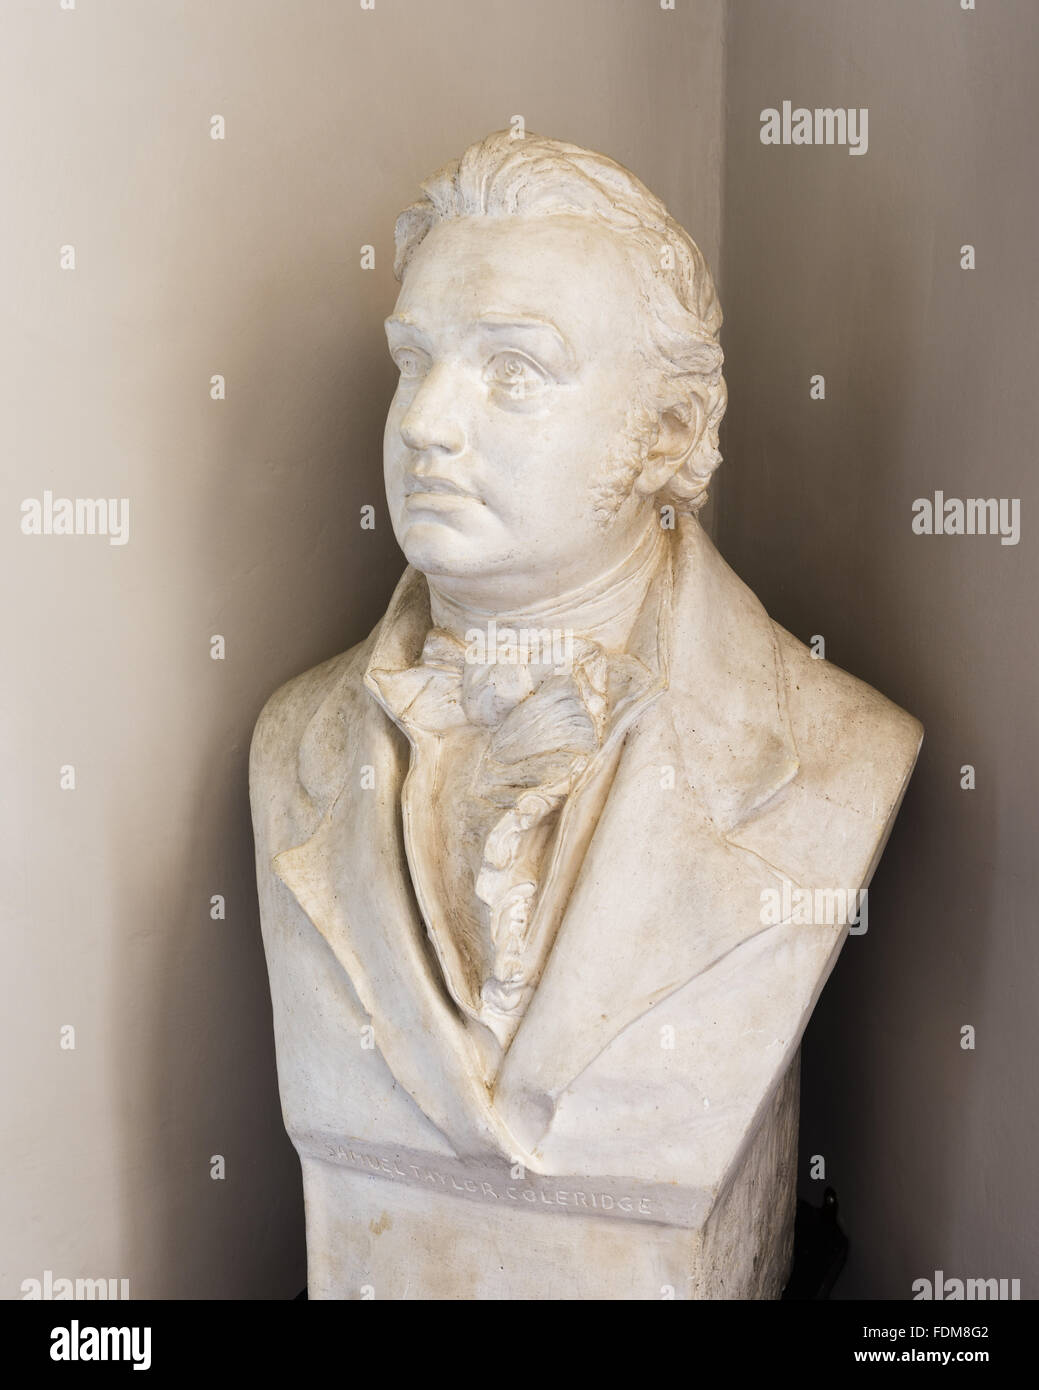 Plaster bust of Samuel Taylor Coleridge (1772-1834) by Sir Hamo Thornycroft (1850-1925) in the Reading Room at Coleridge Cottage, Somerset. NT Inventory number:253350.  Coleridge Cottage was the home of Samuel Taylor Coleridge between 1797 and 1800. Stock Photo